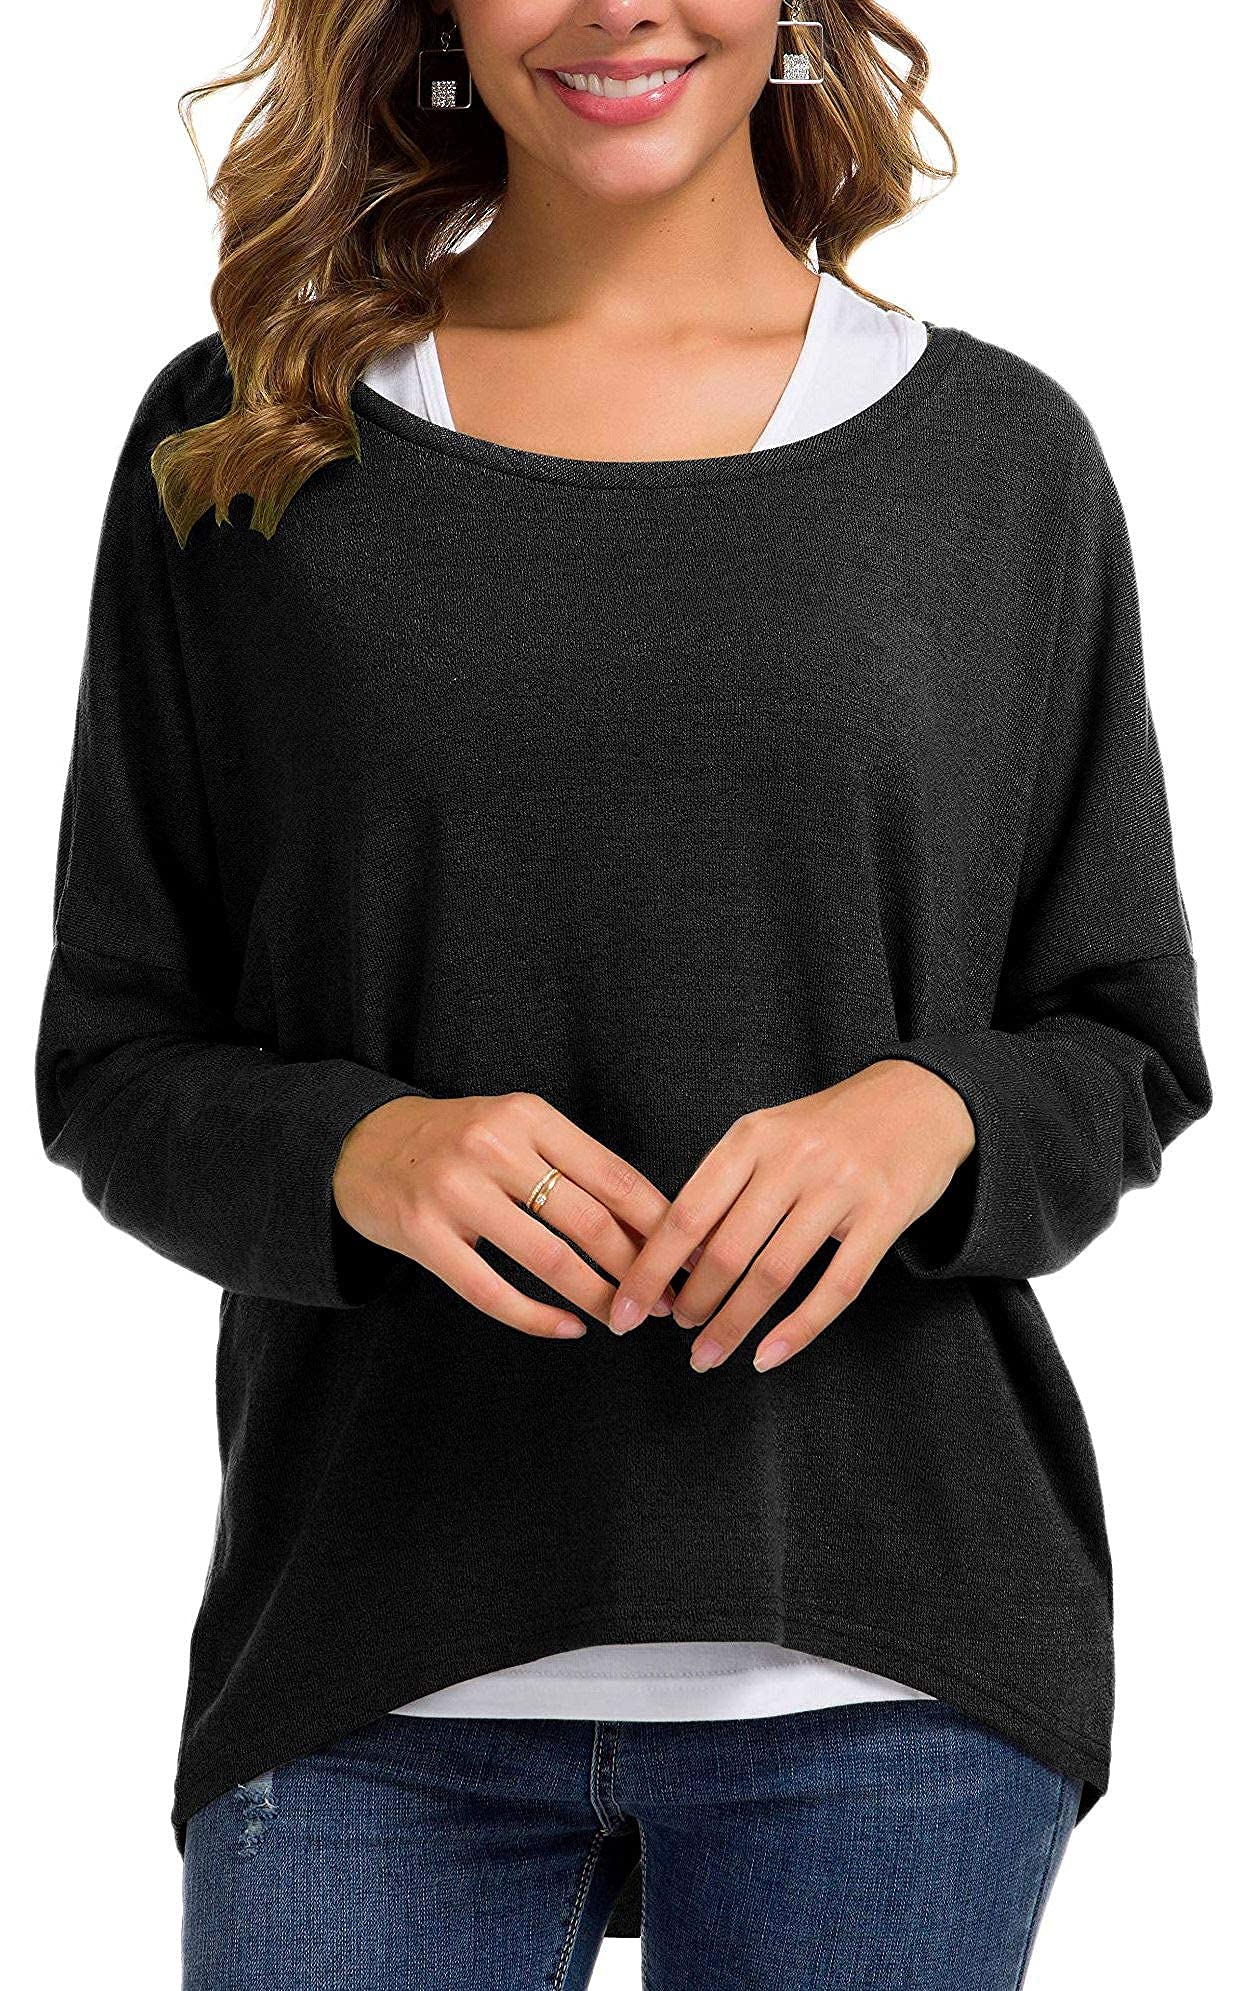 UGET Women's Oversized Baggy Tops Loose Fitting Pullover Casual Blouse T-Shirt Sweater Batwing Sleeve